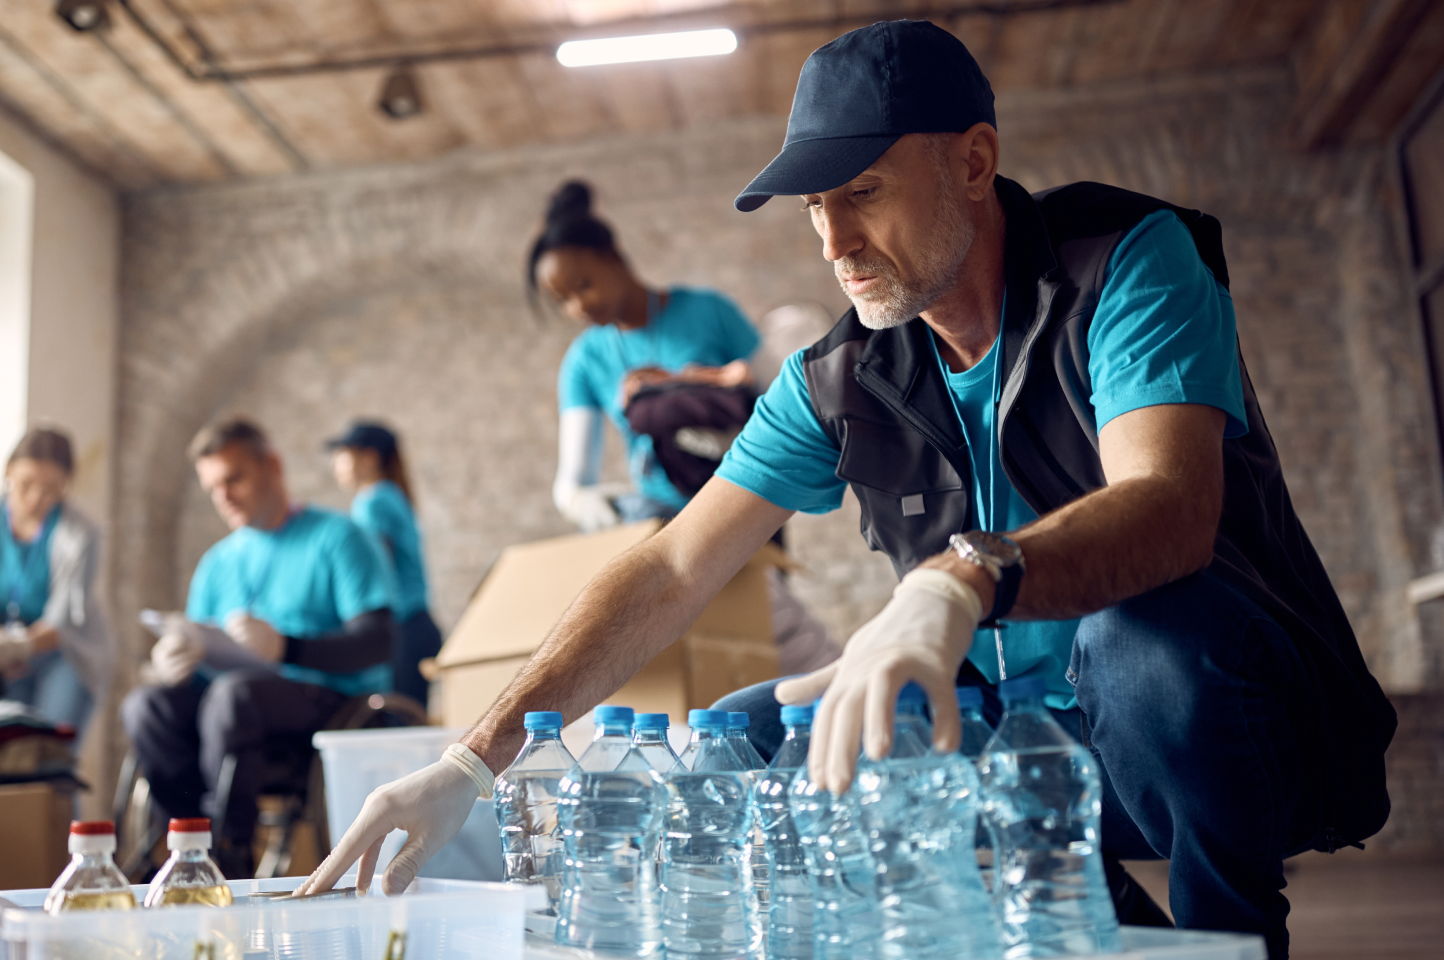 A man in a vest with a logo arranges water bottles for his nonprofit. If you're  Thinking of pursuing tax-exempt, nonprofit status, be certain you understand what it means first.